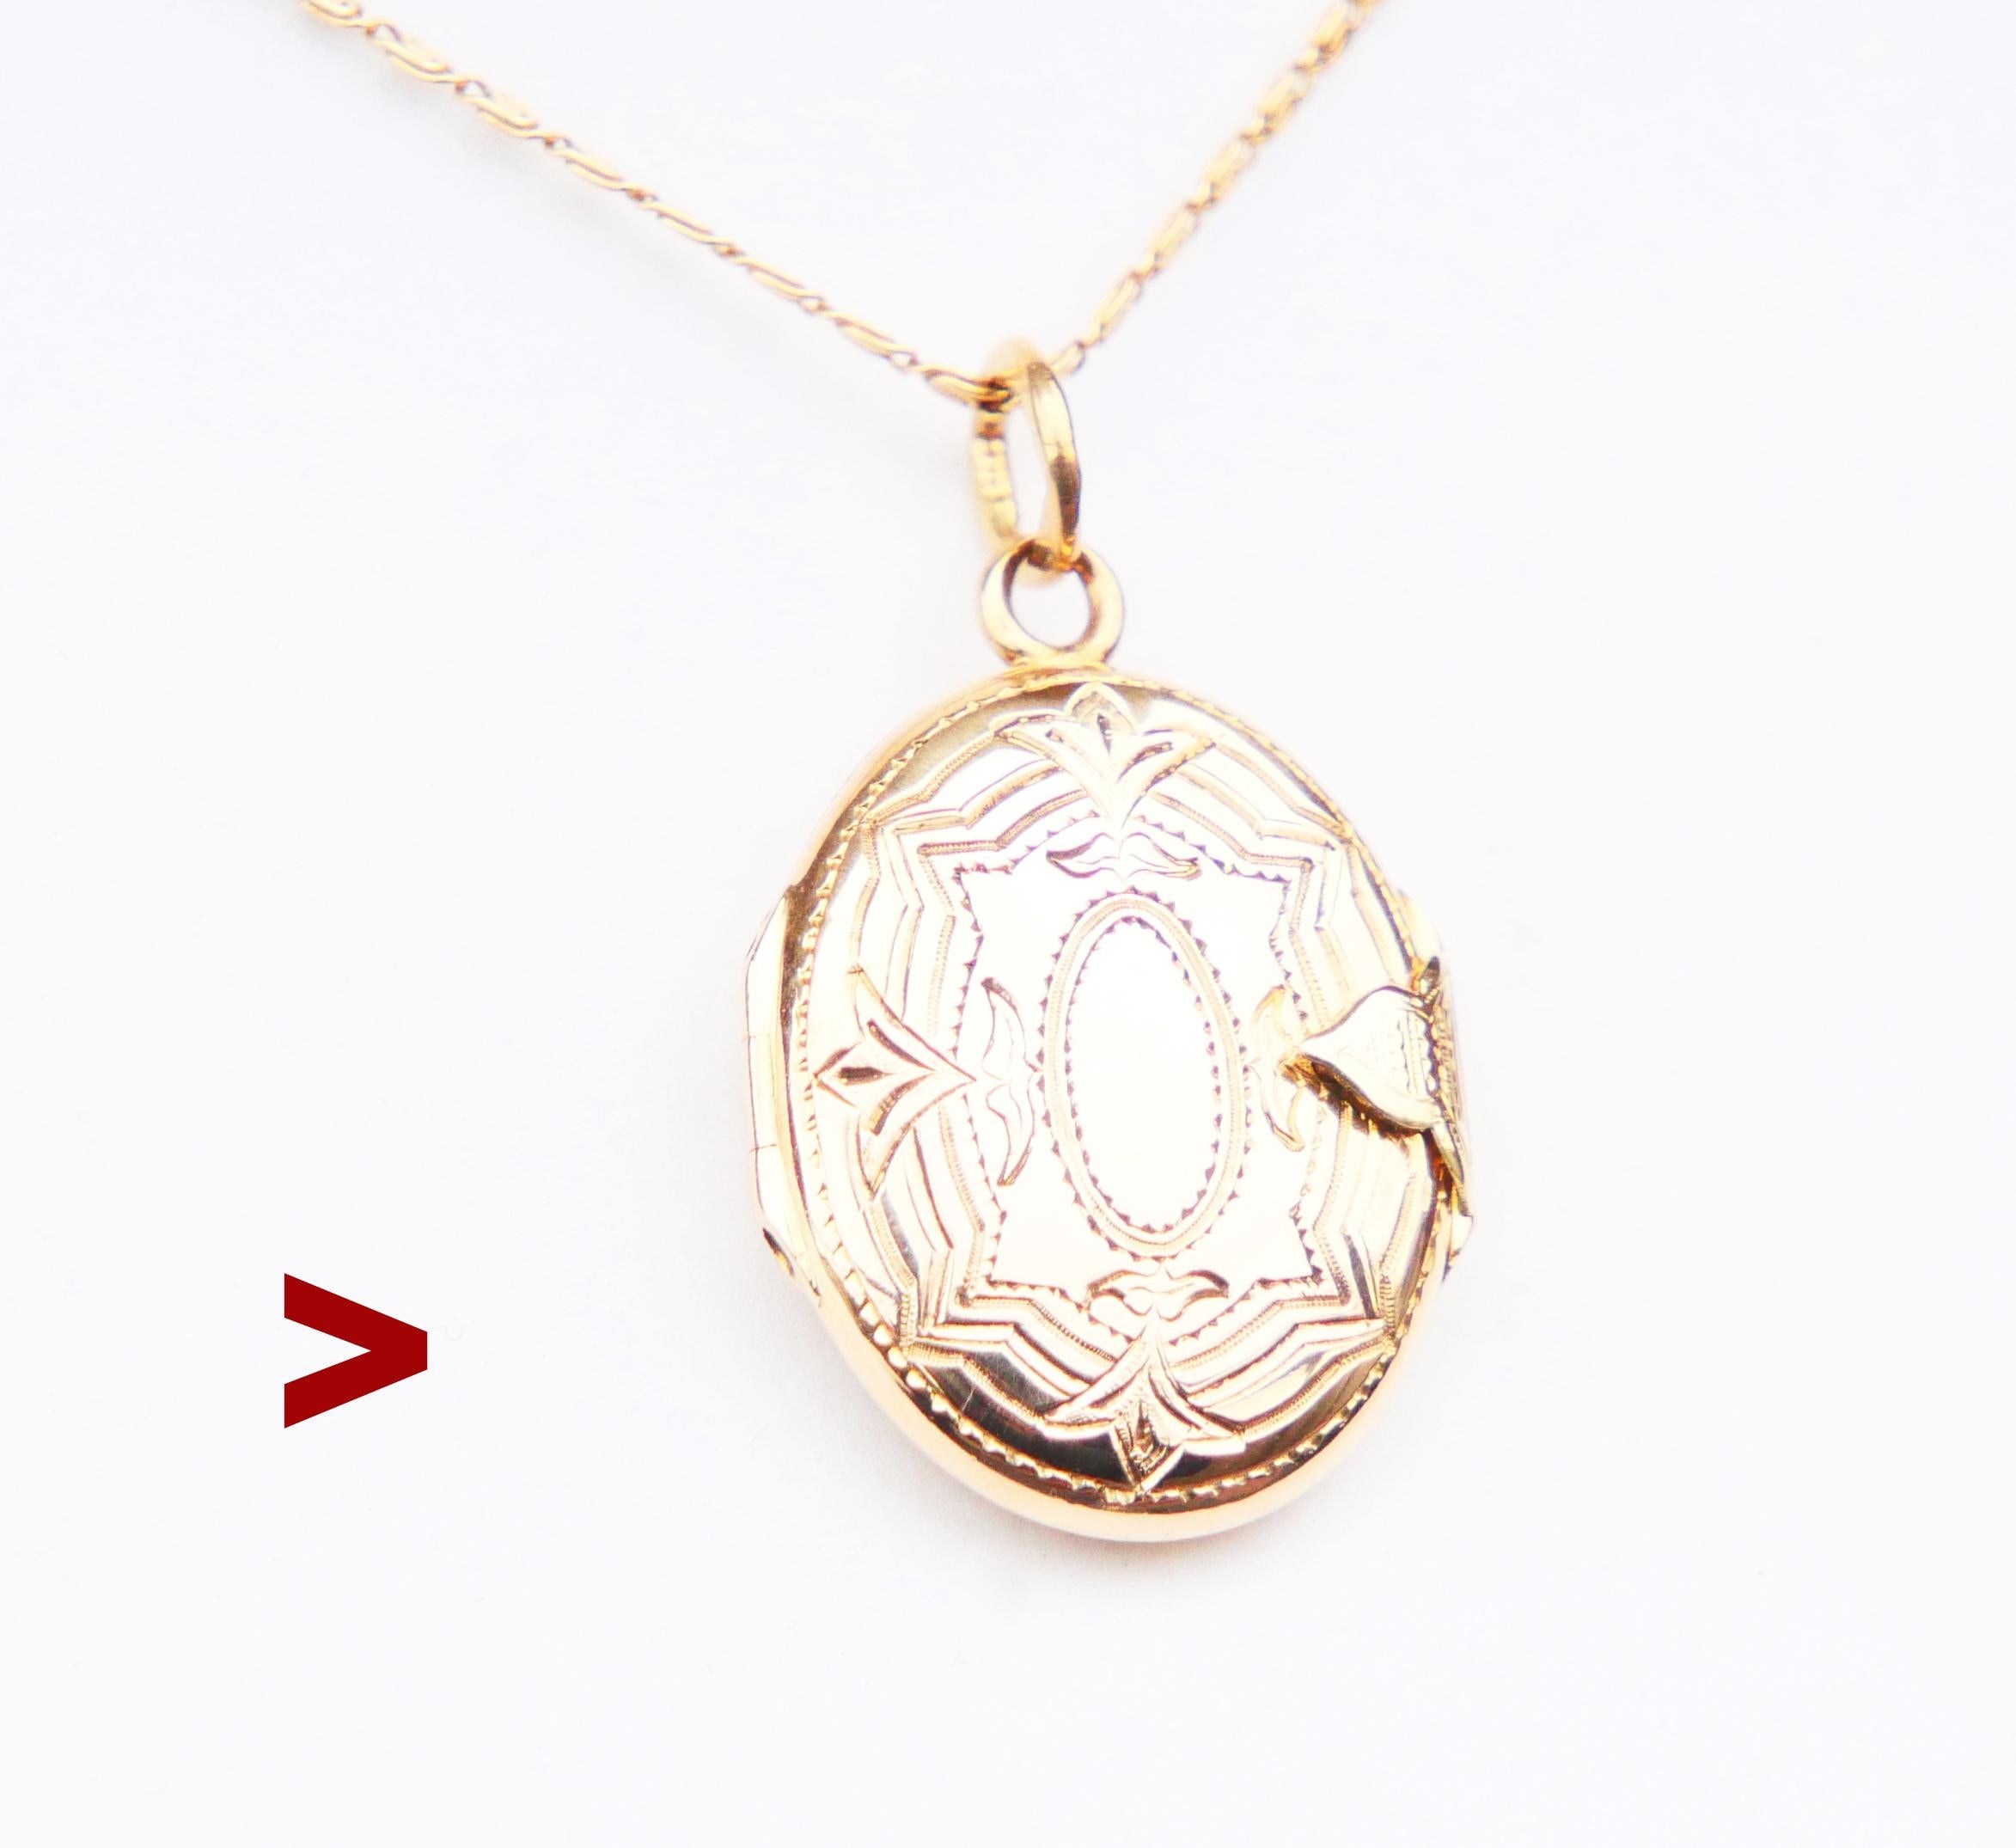 Antique Pendant / Locket made of solid 18K Yellow Gold. Detailed hand - engravings in miniature proportions on both sides.

One sections with inner removable bezel inside.

Swedish locket , hallmarked 18K , unknown maker's marks. Year marks not